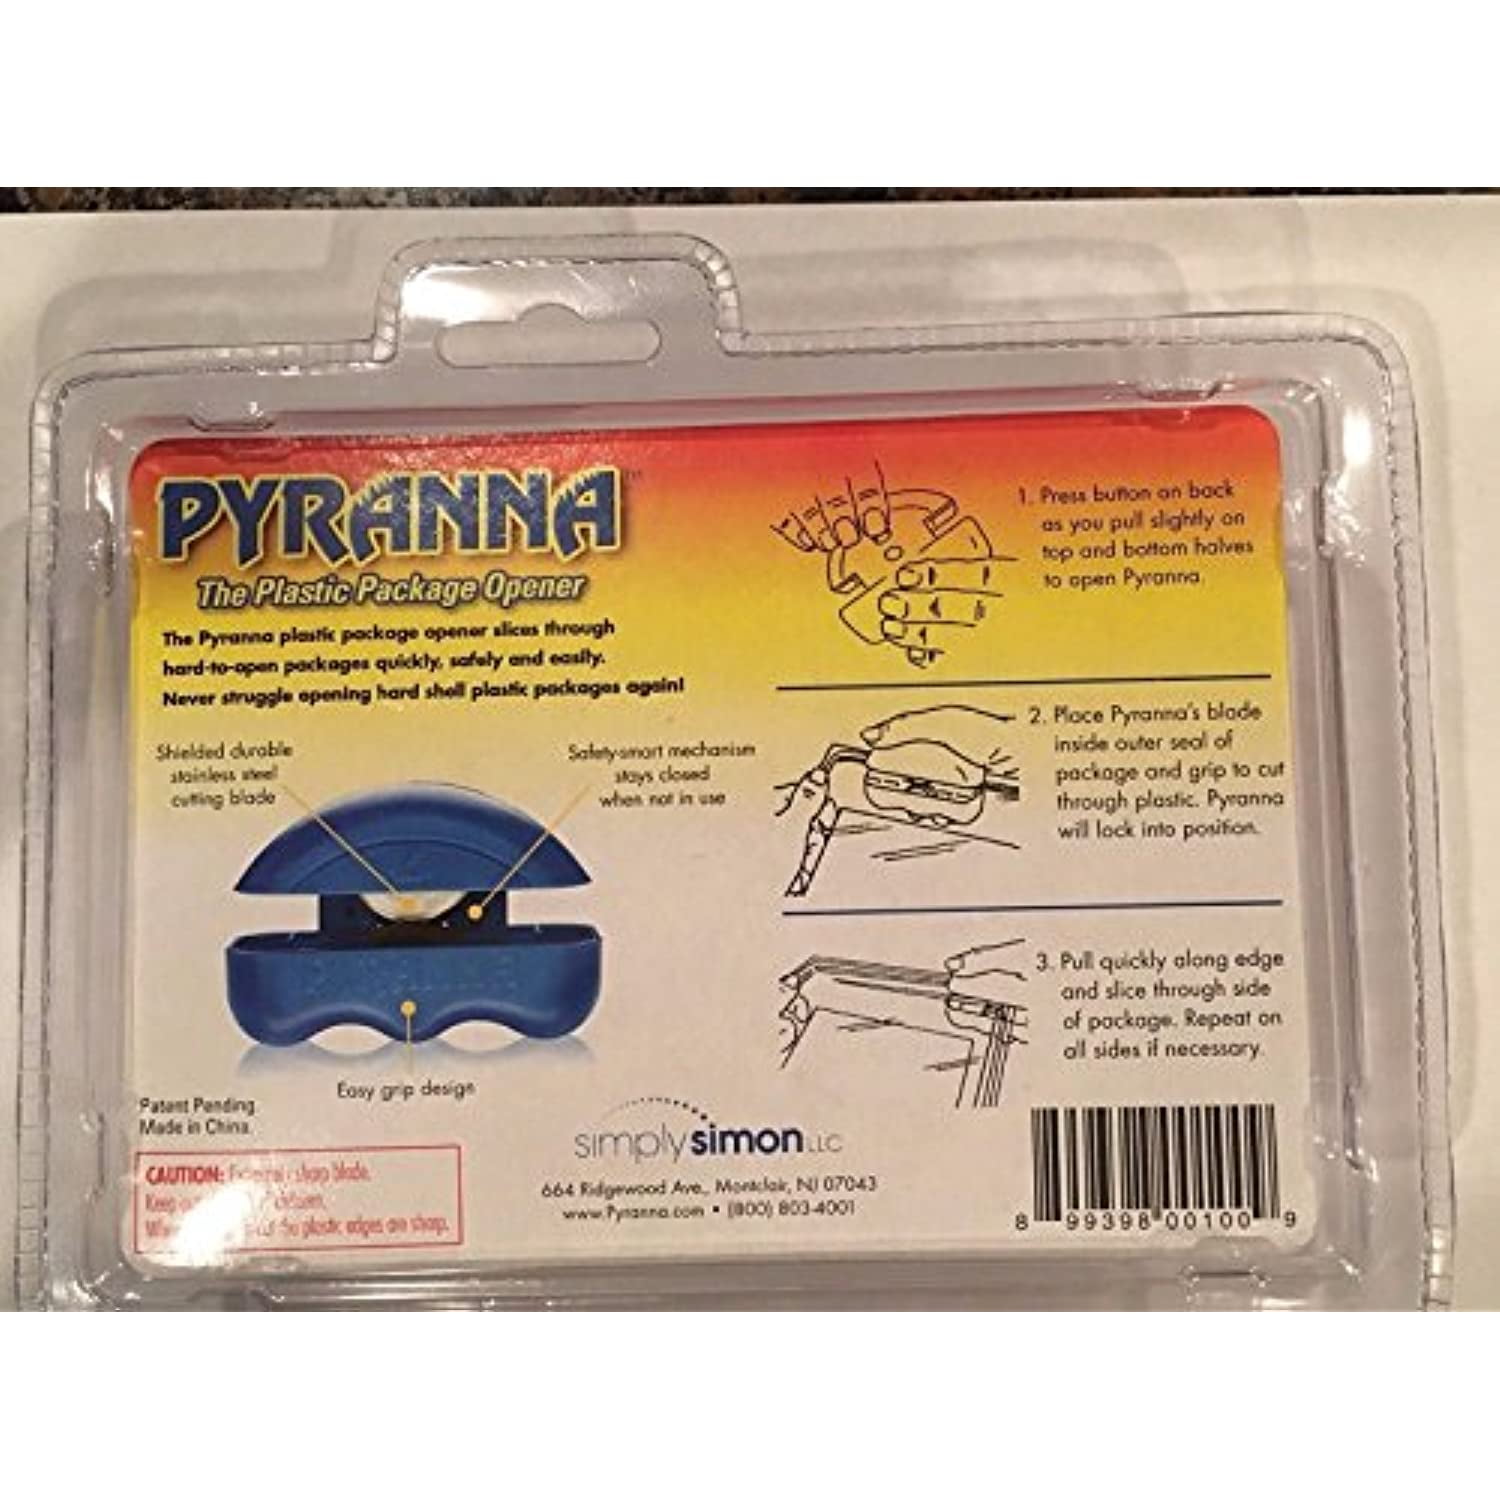 Pyranna Hard Shell Plastic Package Opener As Seen On TV New in